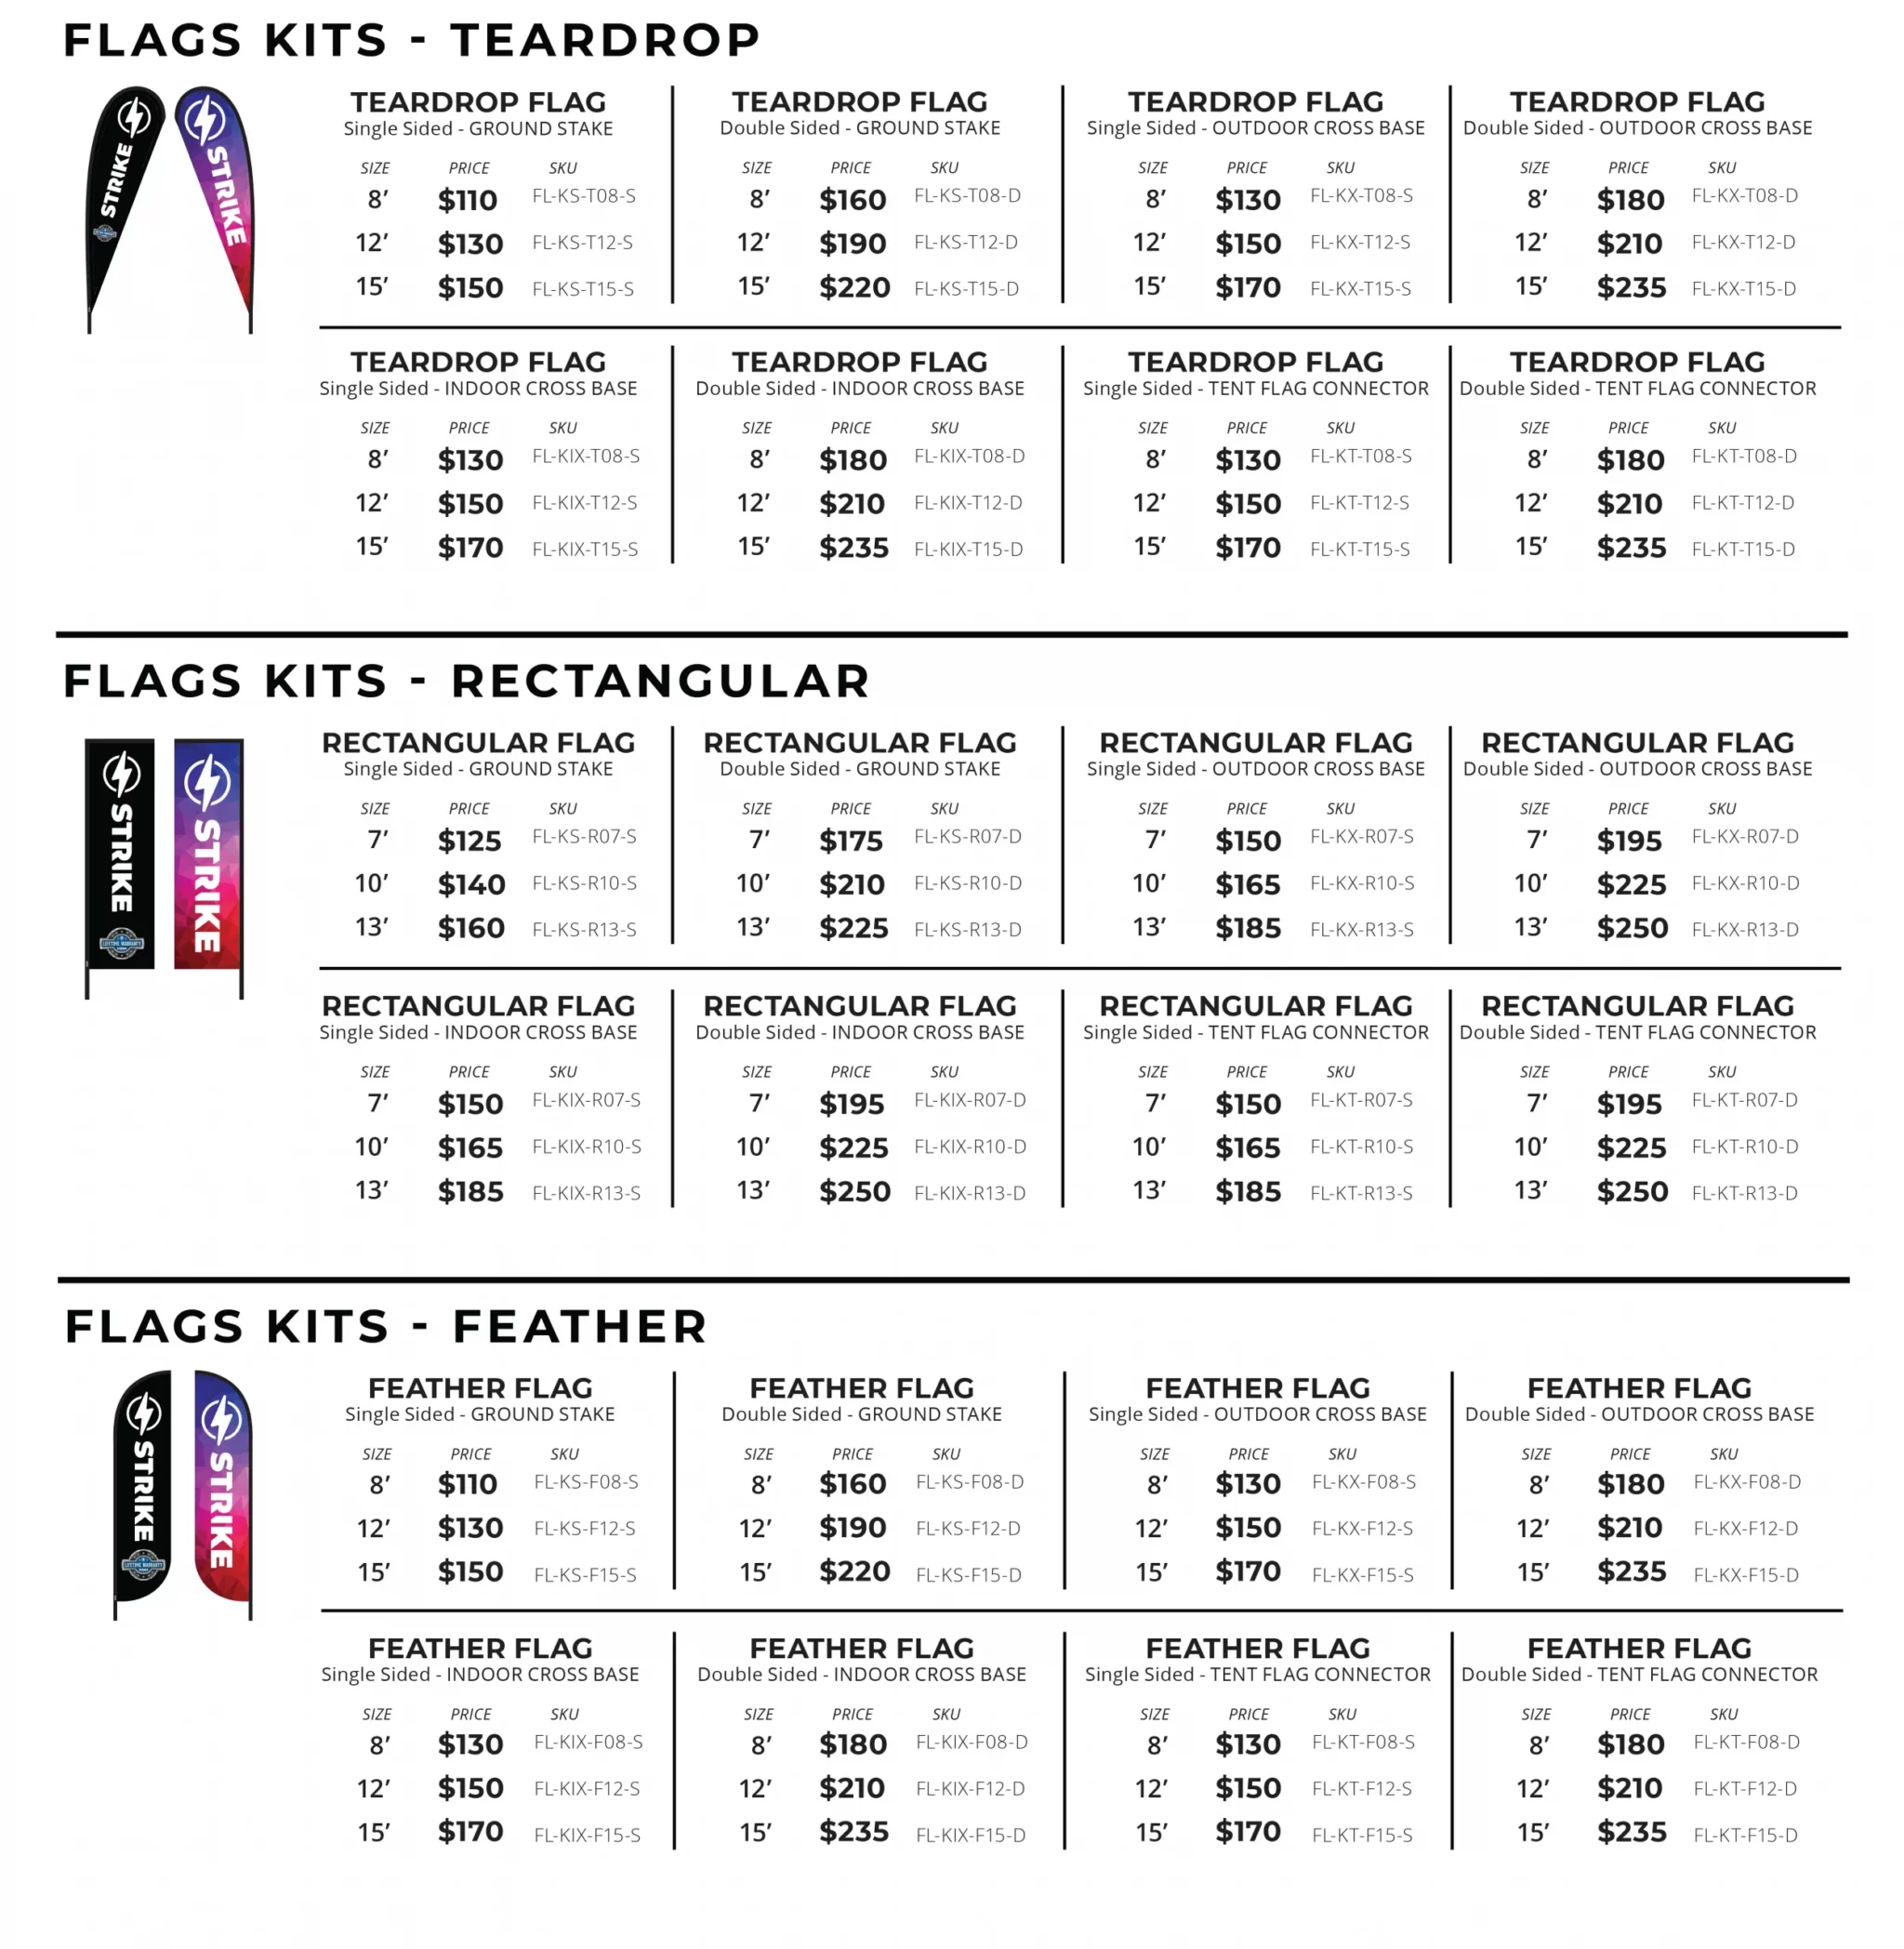 resellers pricing guide for flag kits - teardrop, flag kits - rectangular, flag kits - feather